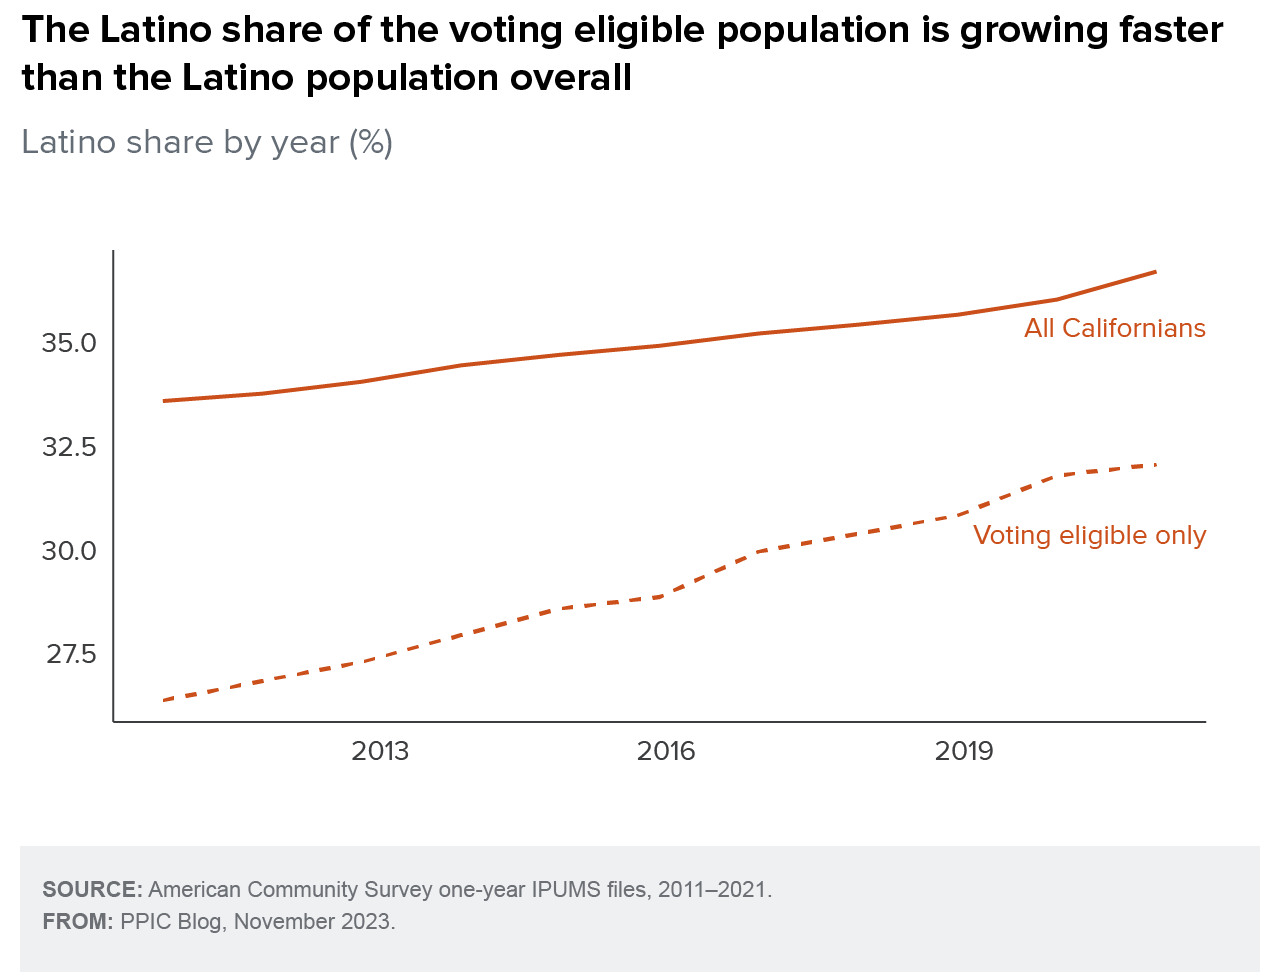 figure - The Latino share of the voting eligible population is growing faster than the Latino population overall